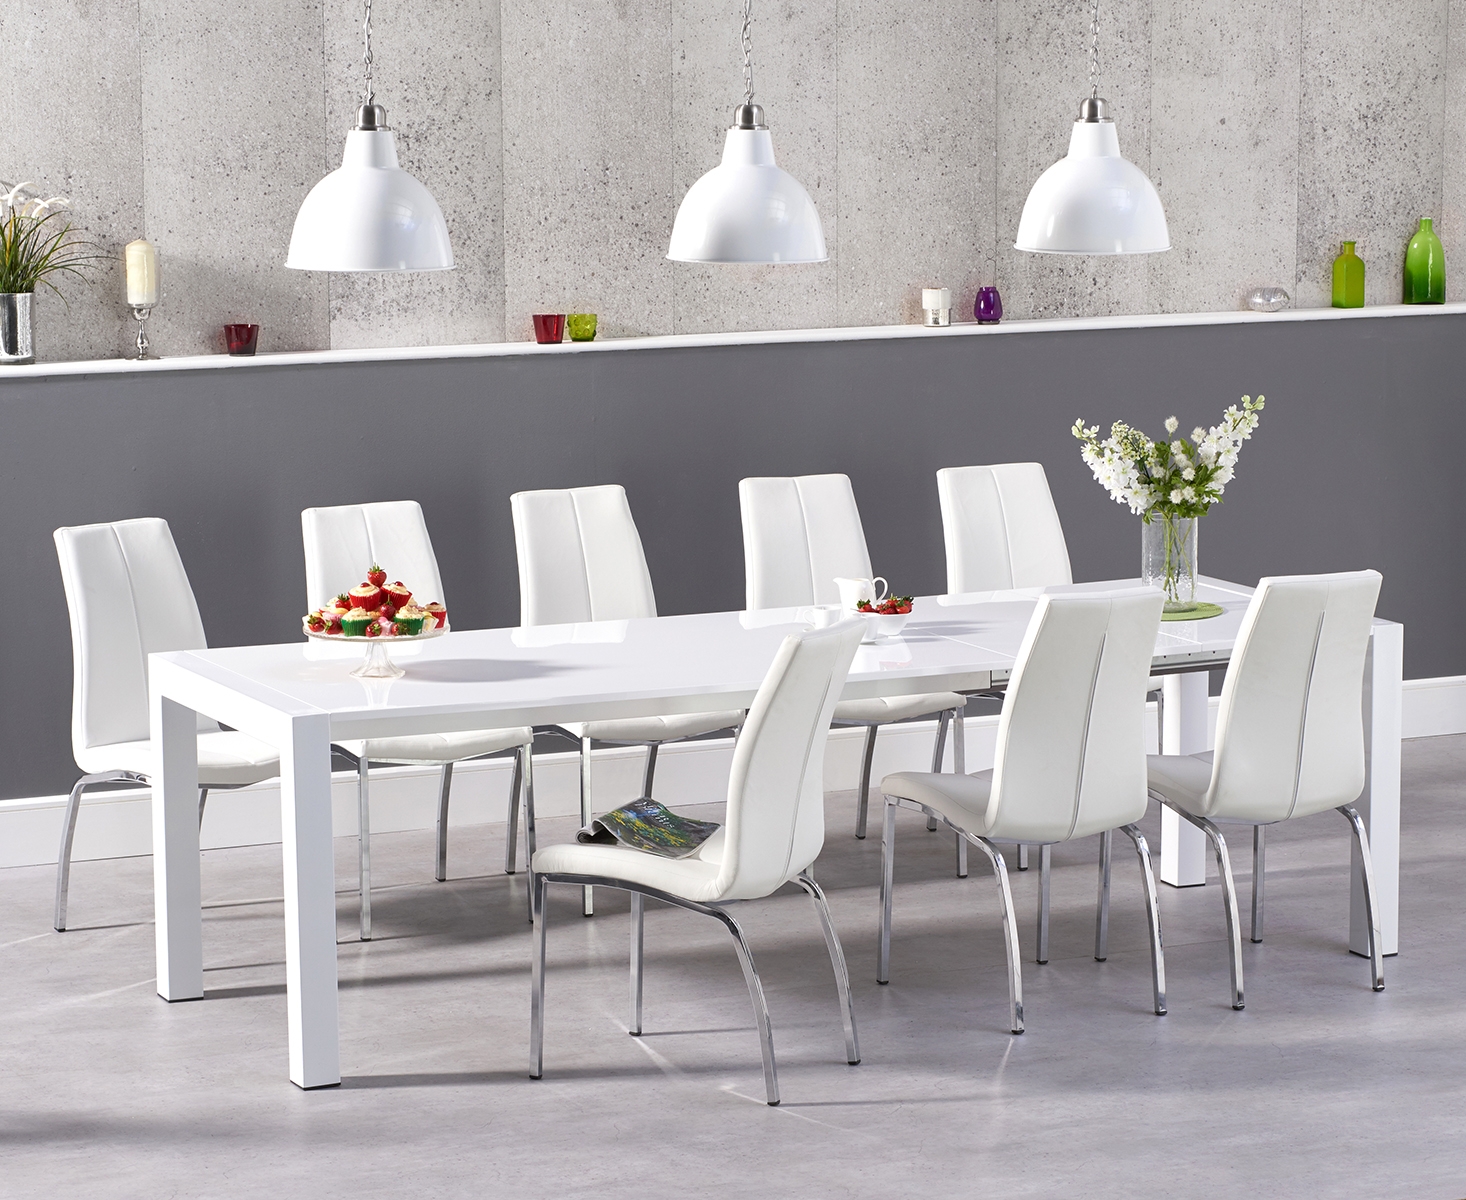 Extending Cleveland White High Gloss Dining Table With 10 Grey Marco Chairs